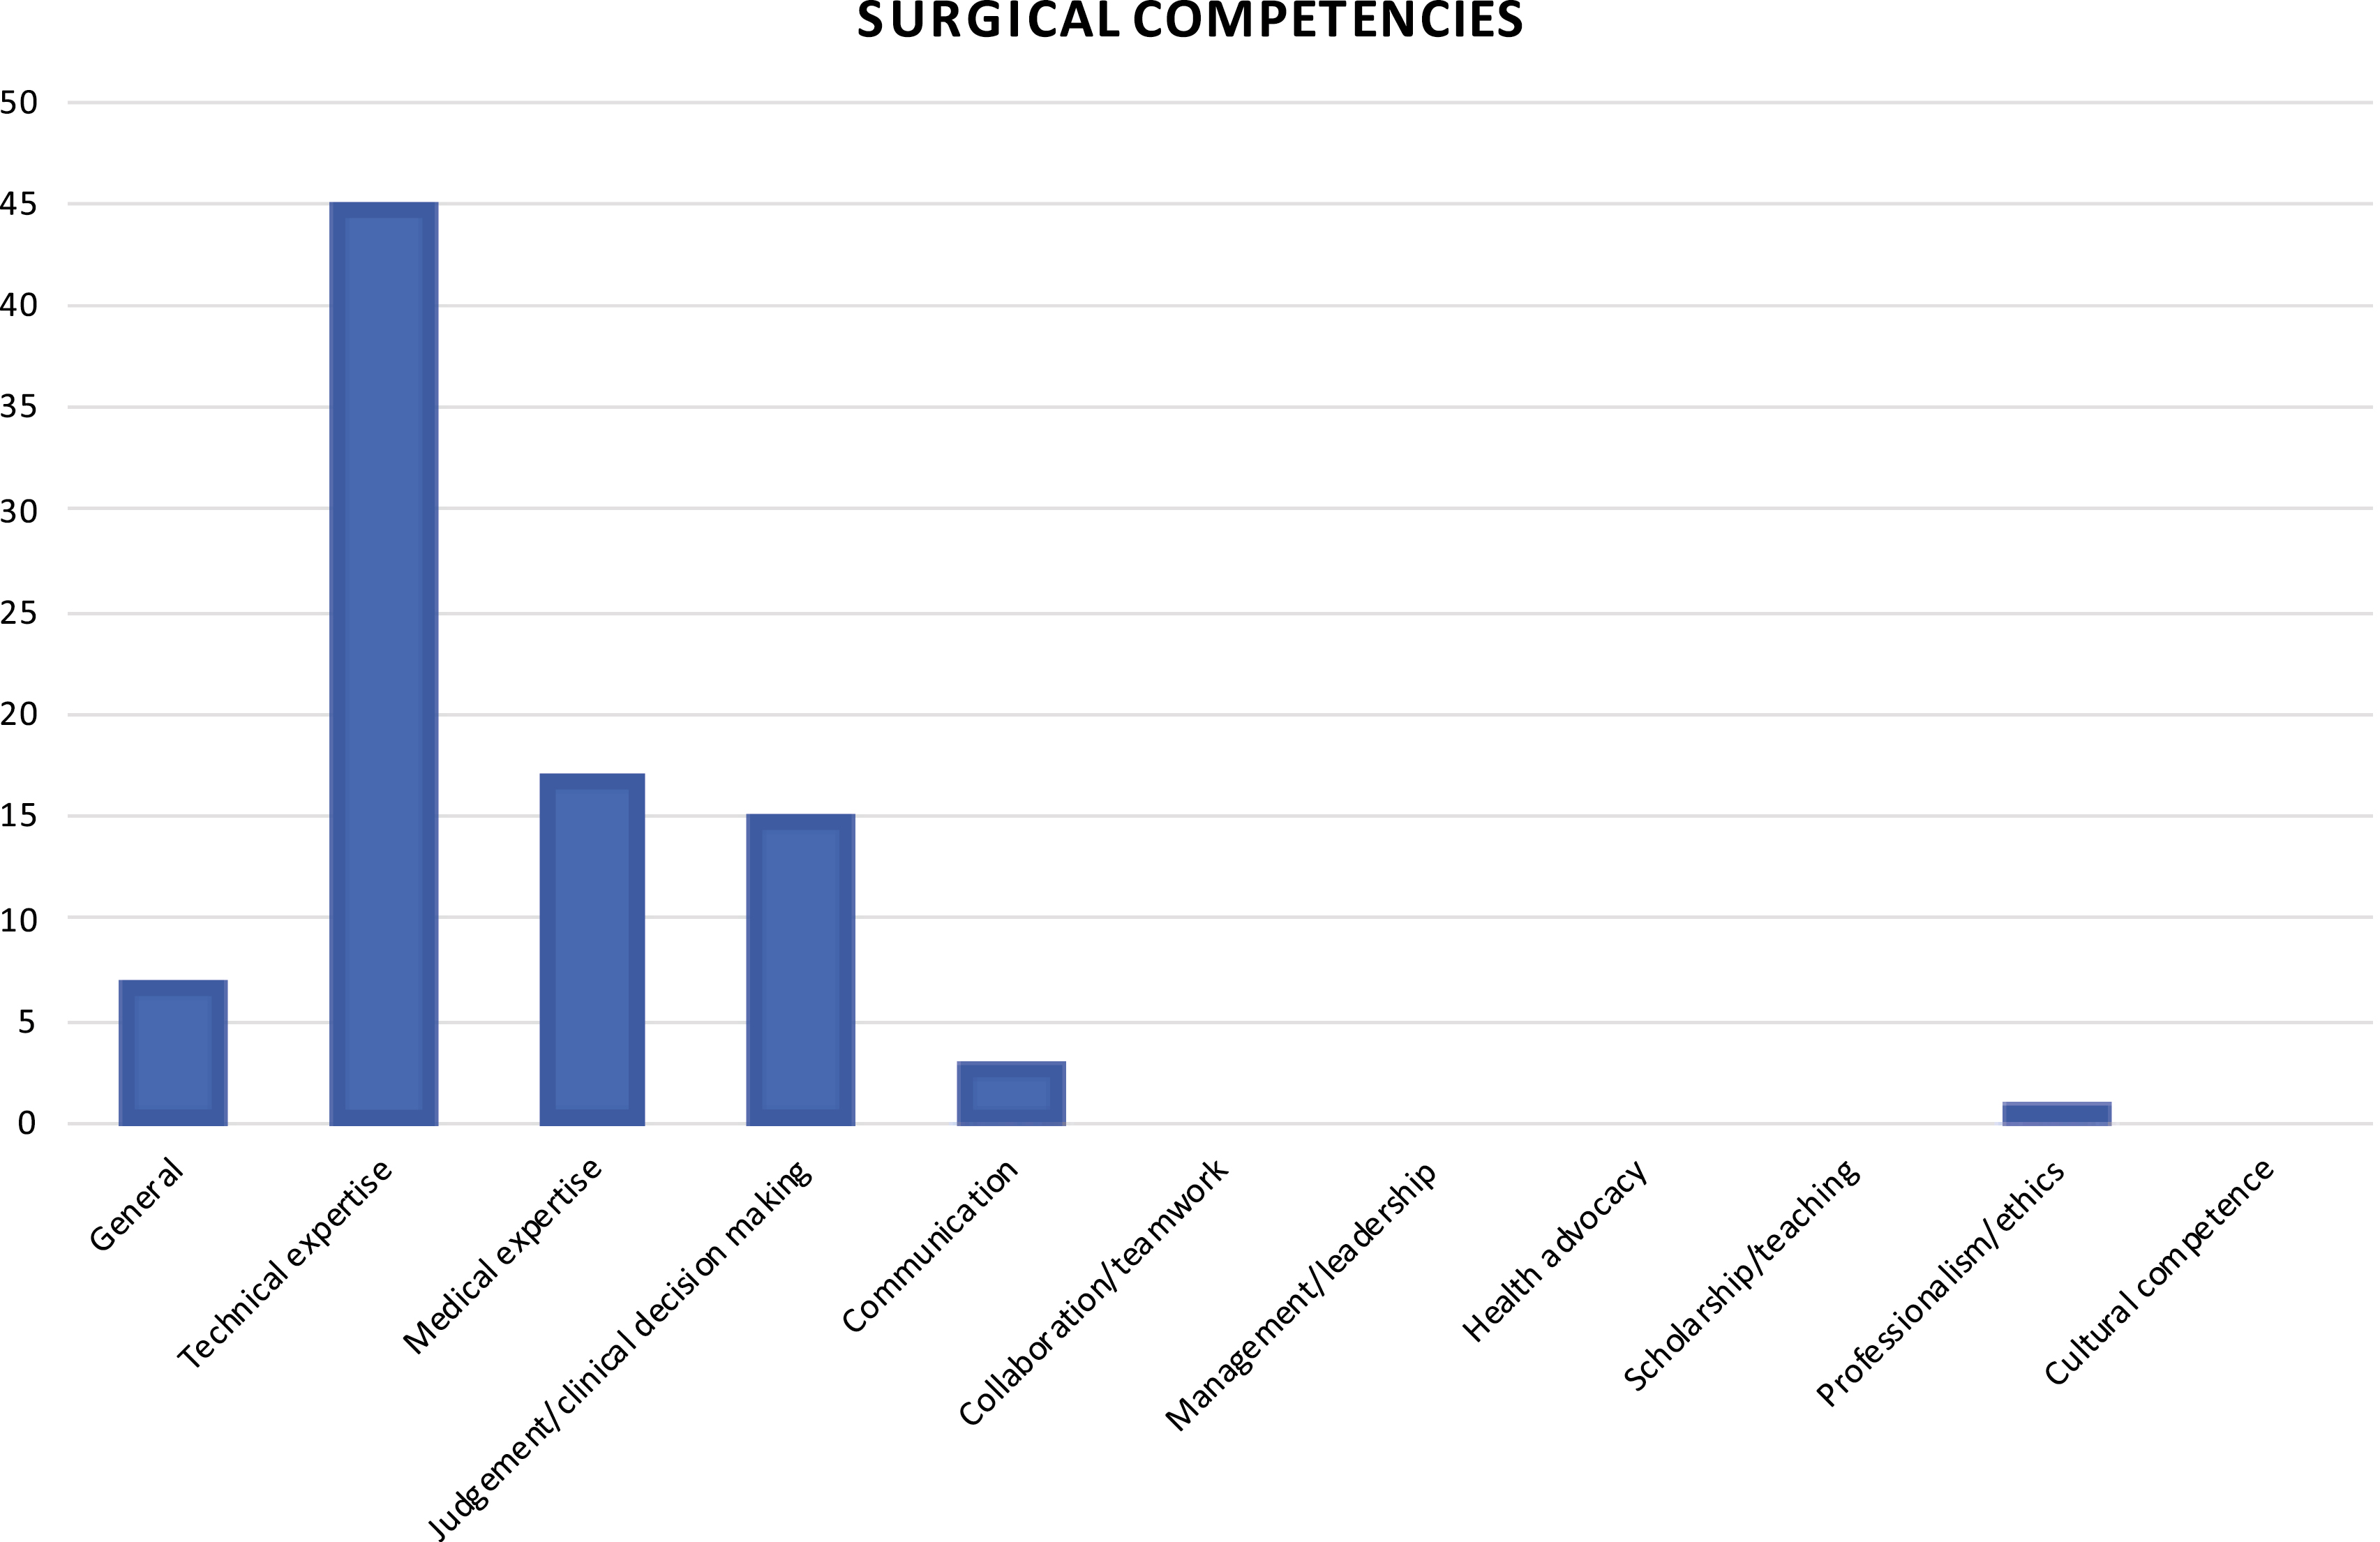 Royal Australasian College of Surgeons competencies [9] identified in sources included in this review, represented graphically with accompanying table.